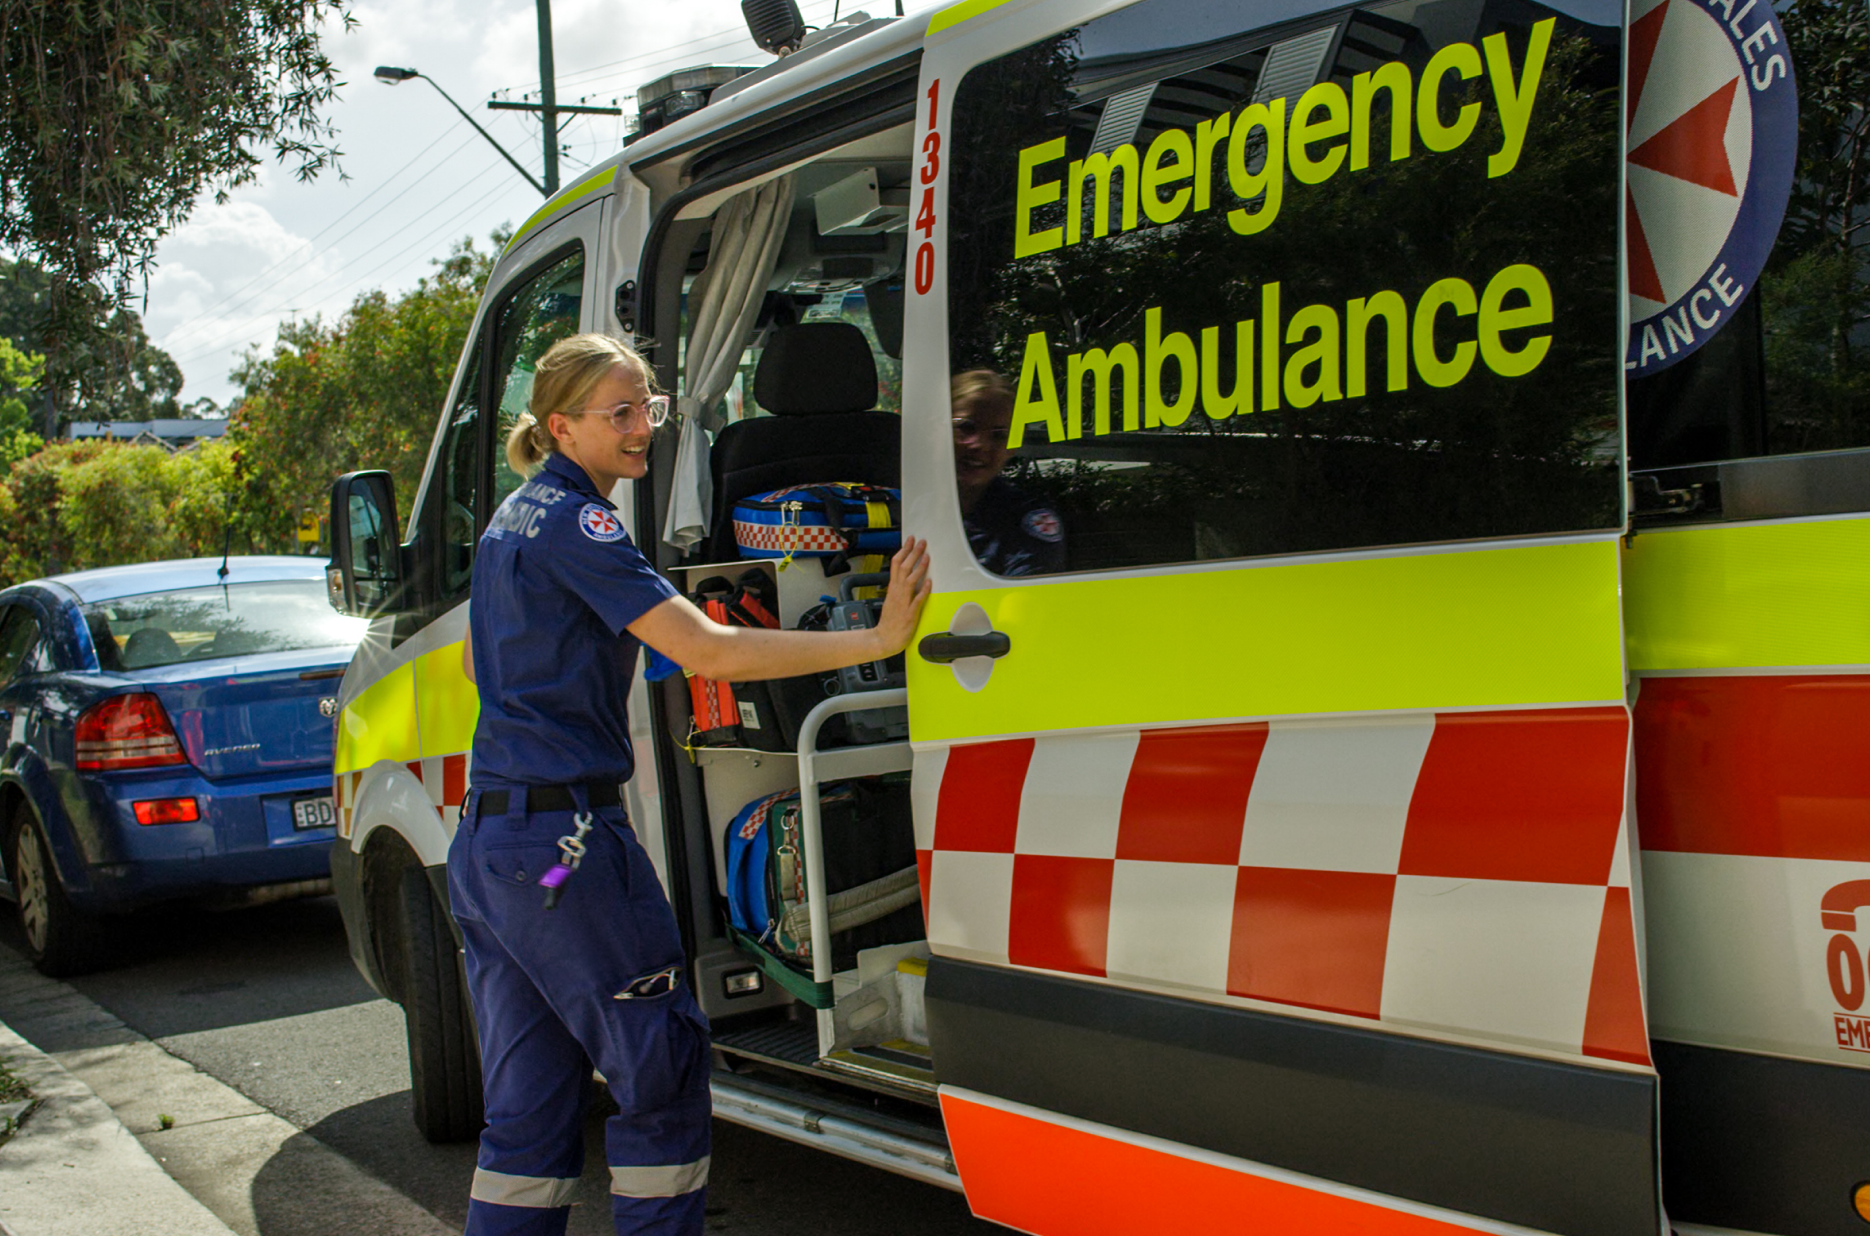 Paramedic opening the door of an ambulance.